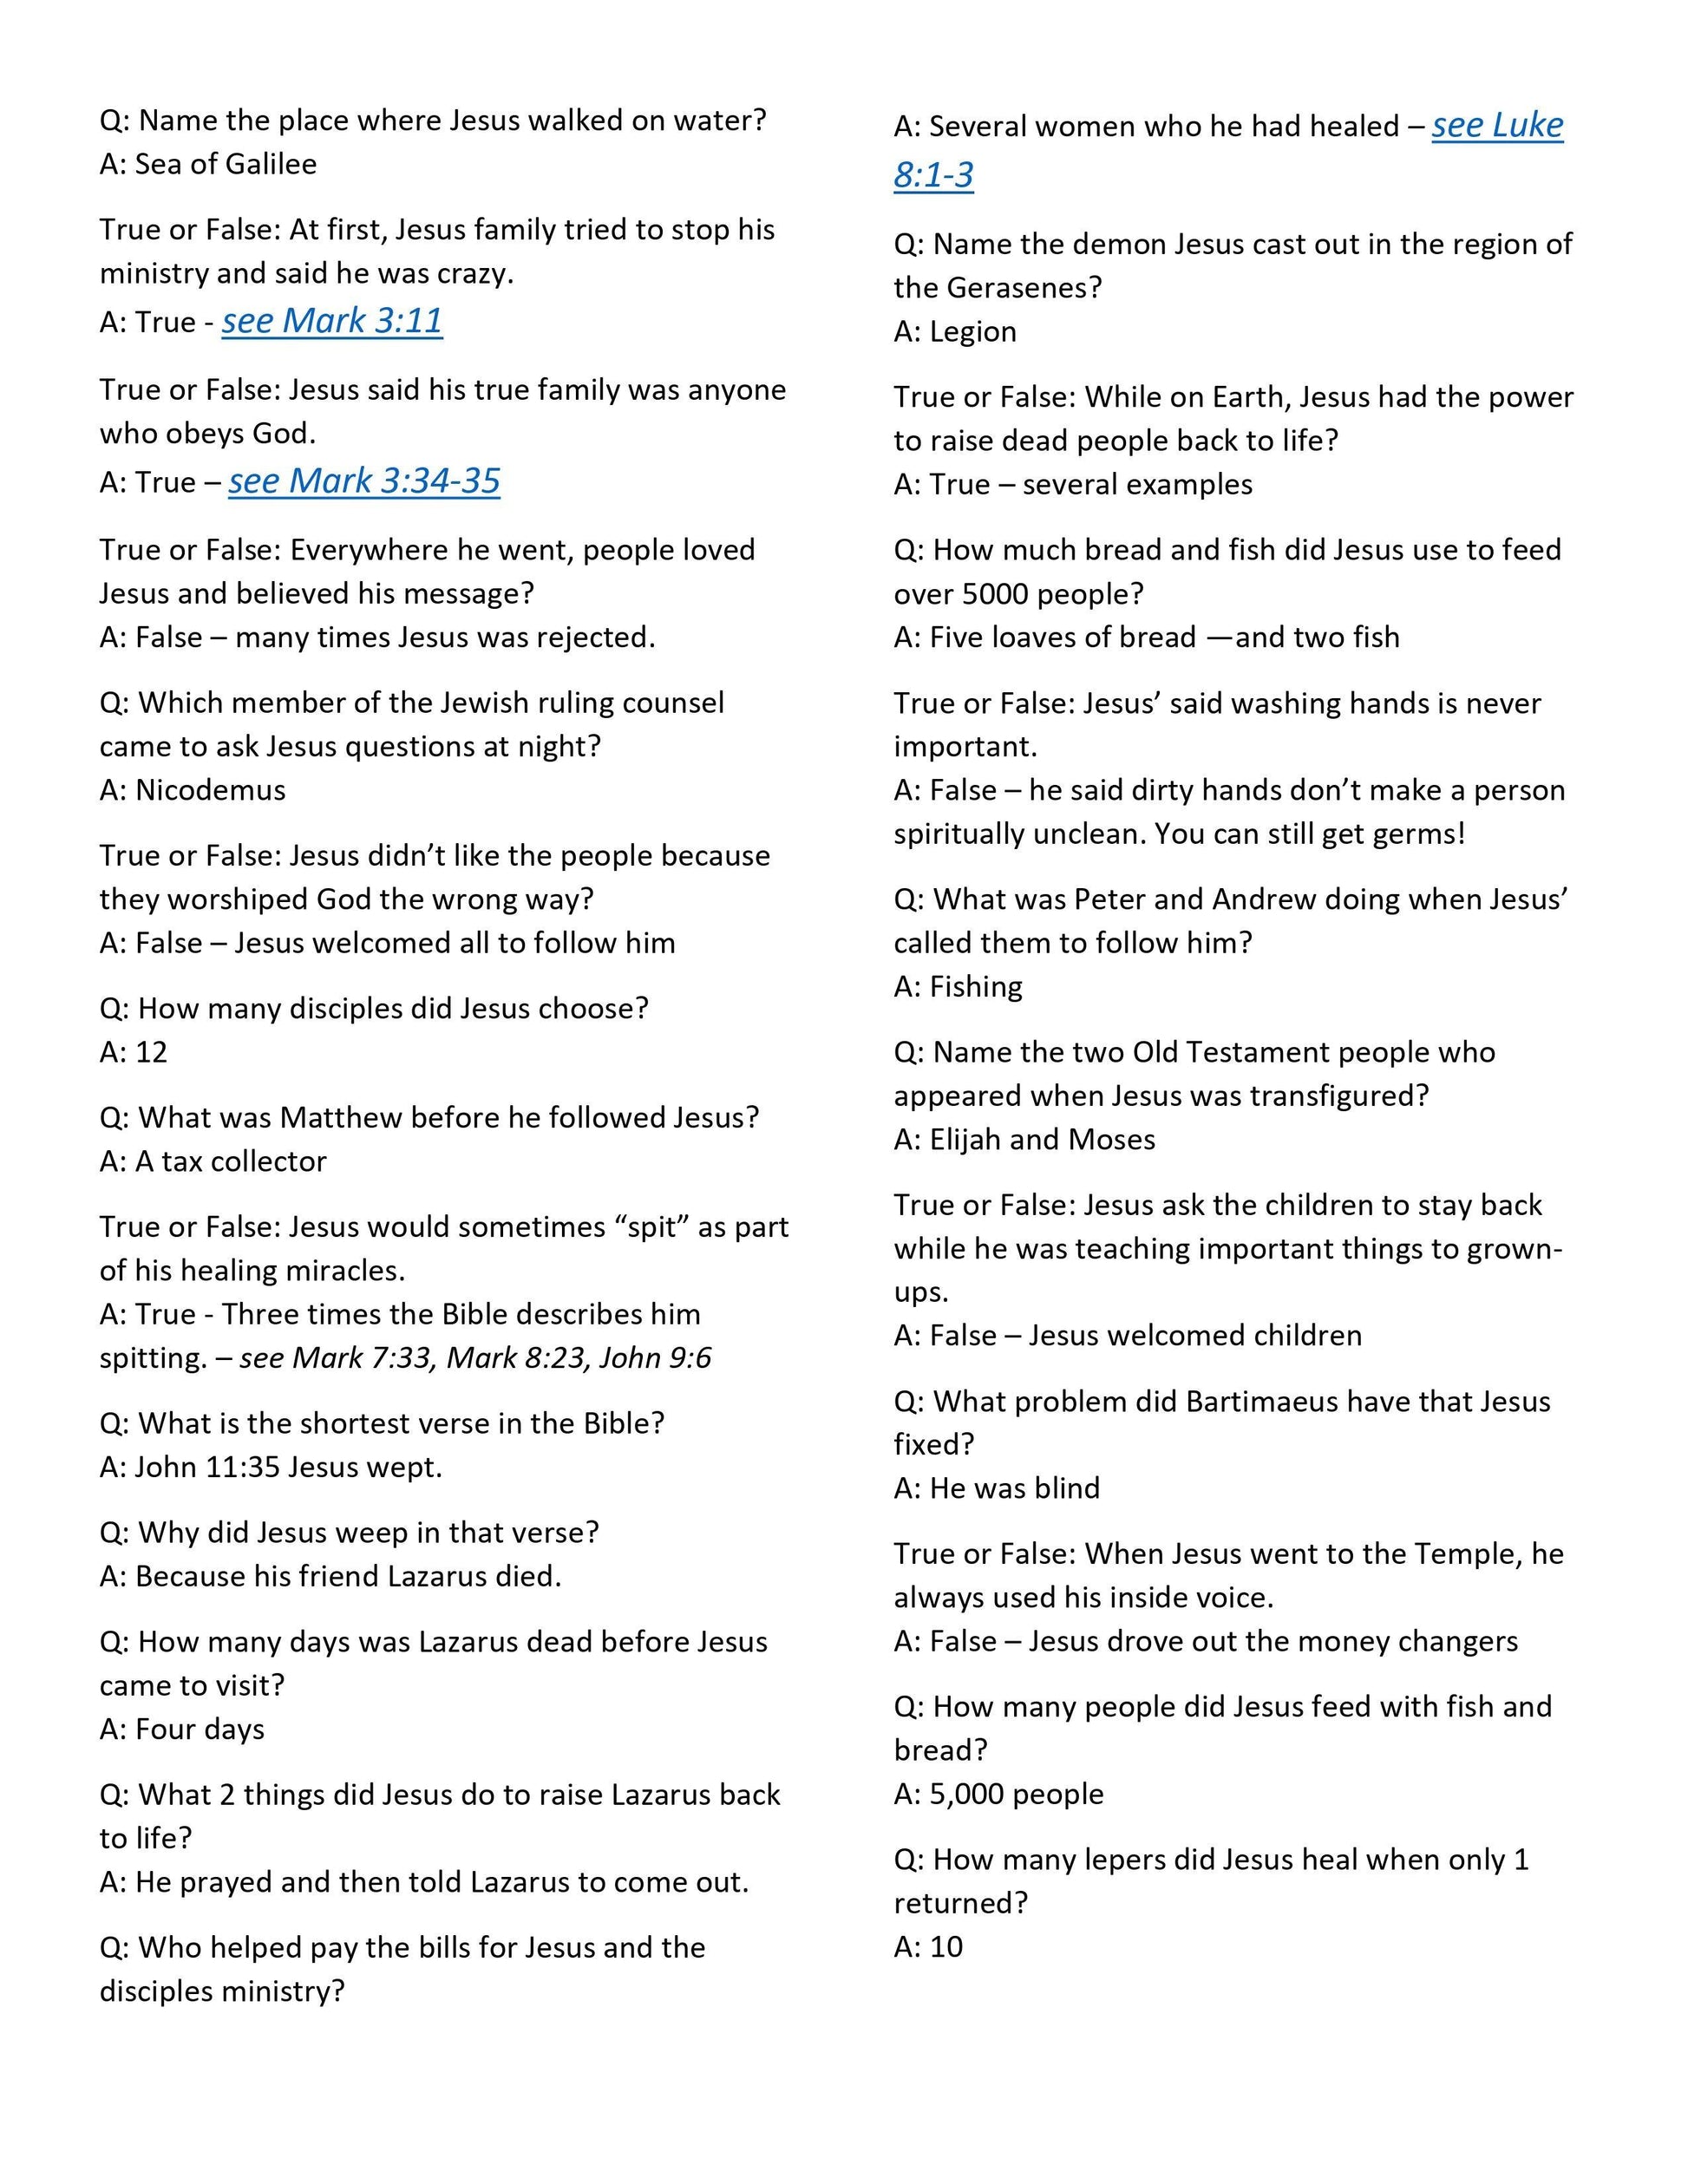 301 Bible Trivia Questions & Answers (free download) - Sunday School Store 